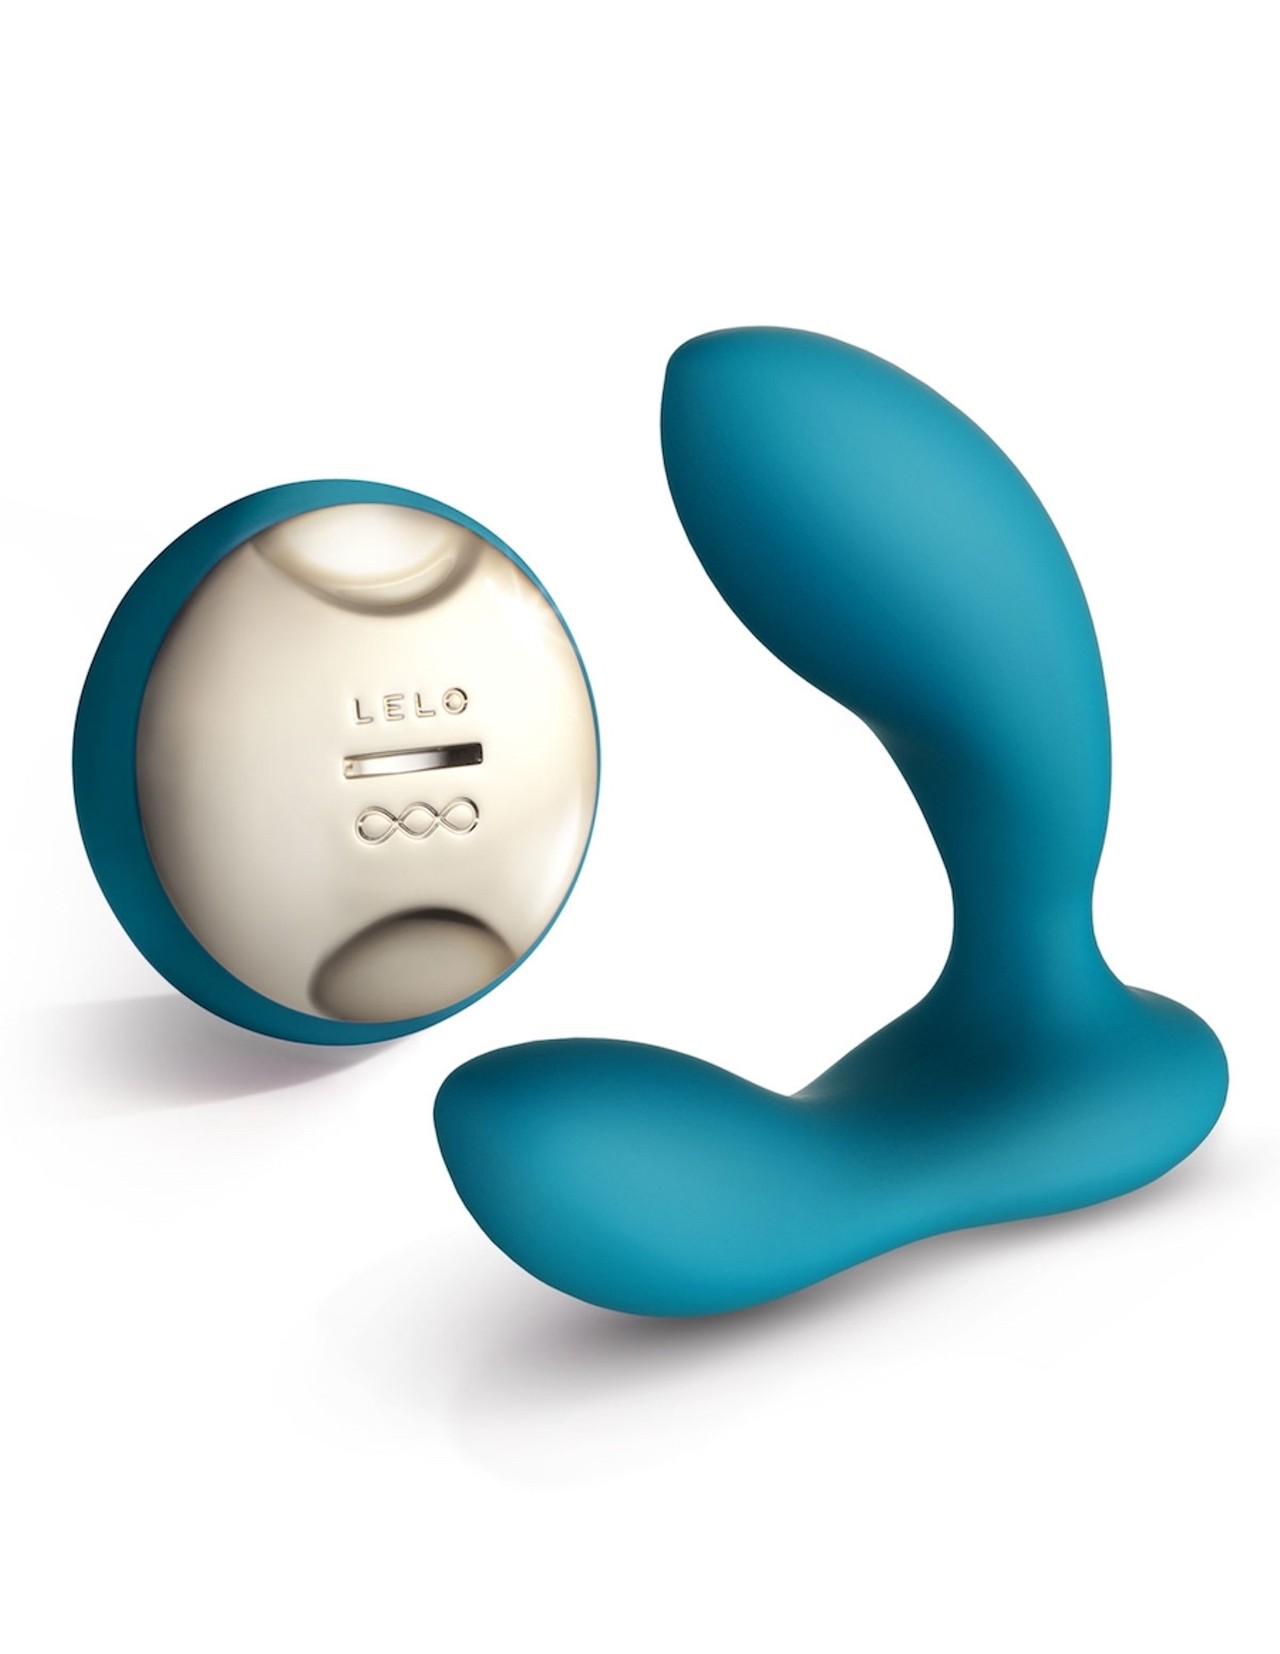 For those who need some backdoor &#151; and perineum &#151; love 
Lelo, Hugo Remote Prostate Massager, $219
Lover's Lane, various locations,  loverslane.com
Prostates need love, too. Bring those P-spot orgasms to new heights with a little help from Hugo. Though this toy can be enjoyed solo or during couples play, the Hugo Remote Prostate Massager by Lelo has two motors in the base and tip for interior and exterior pleasure and comes with a remote so you can play with yourself in more ways than one. Not only does the toy boast a smooth shape for easy insertion and offers six vibration patterns, but it also has an external motor to massage the perineum. For those not in the know, cisgender males and those assigned male at birth can achieve prostate orgasm by, well, massaging the prostate internally or by giving the perineum (aka the taint) a nice rubdown. Massage together? That's for you to find out. Oh, it should be noted that this toy can be enjoyed by everyone because, yeah, it's that good. 
Photo via   loverslane.com